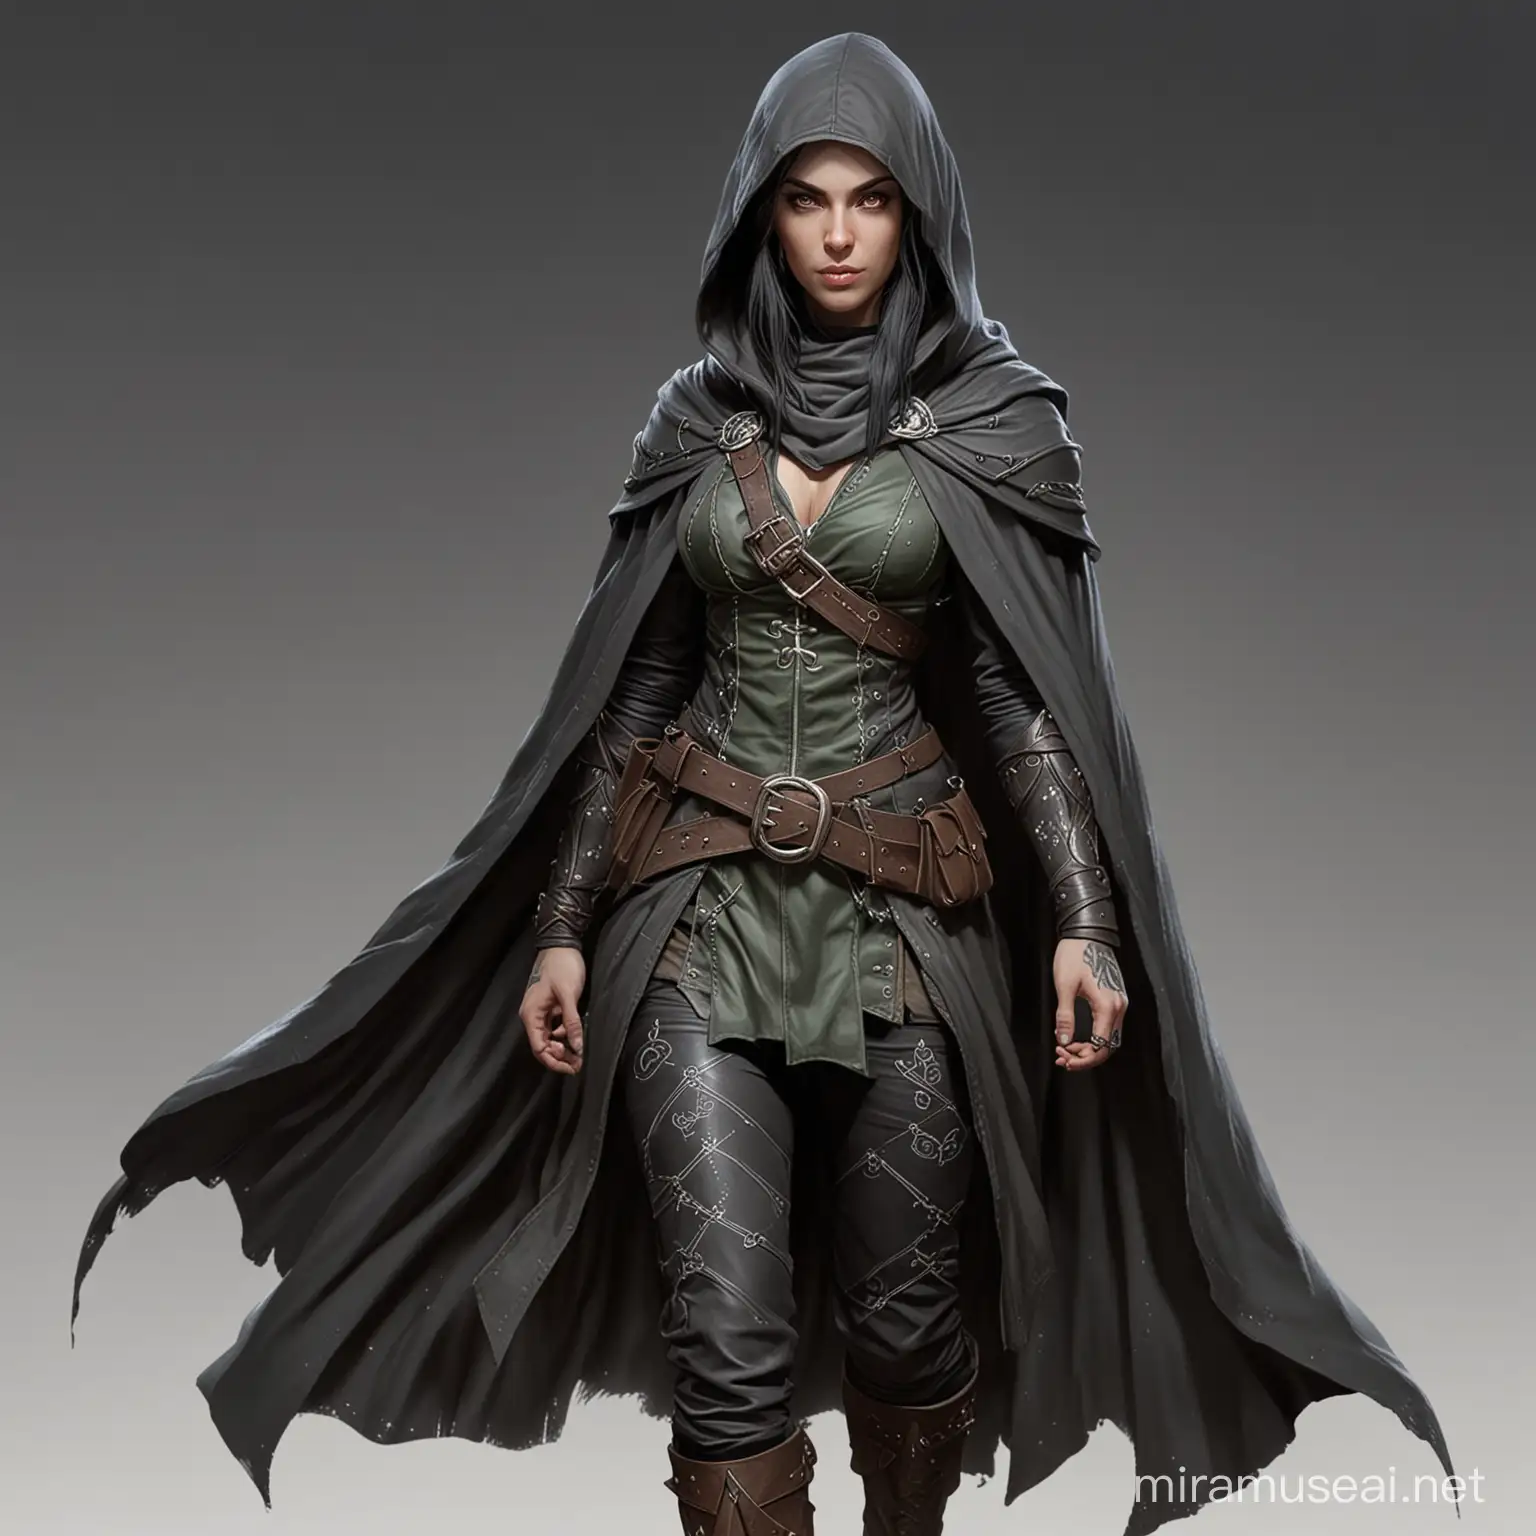 Aged Pale Elf Female Ranger in Hooded Cape Cloak with Intricate Tattoos